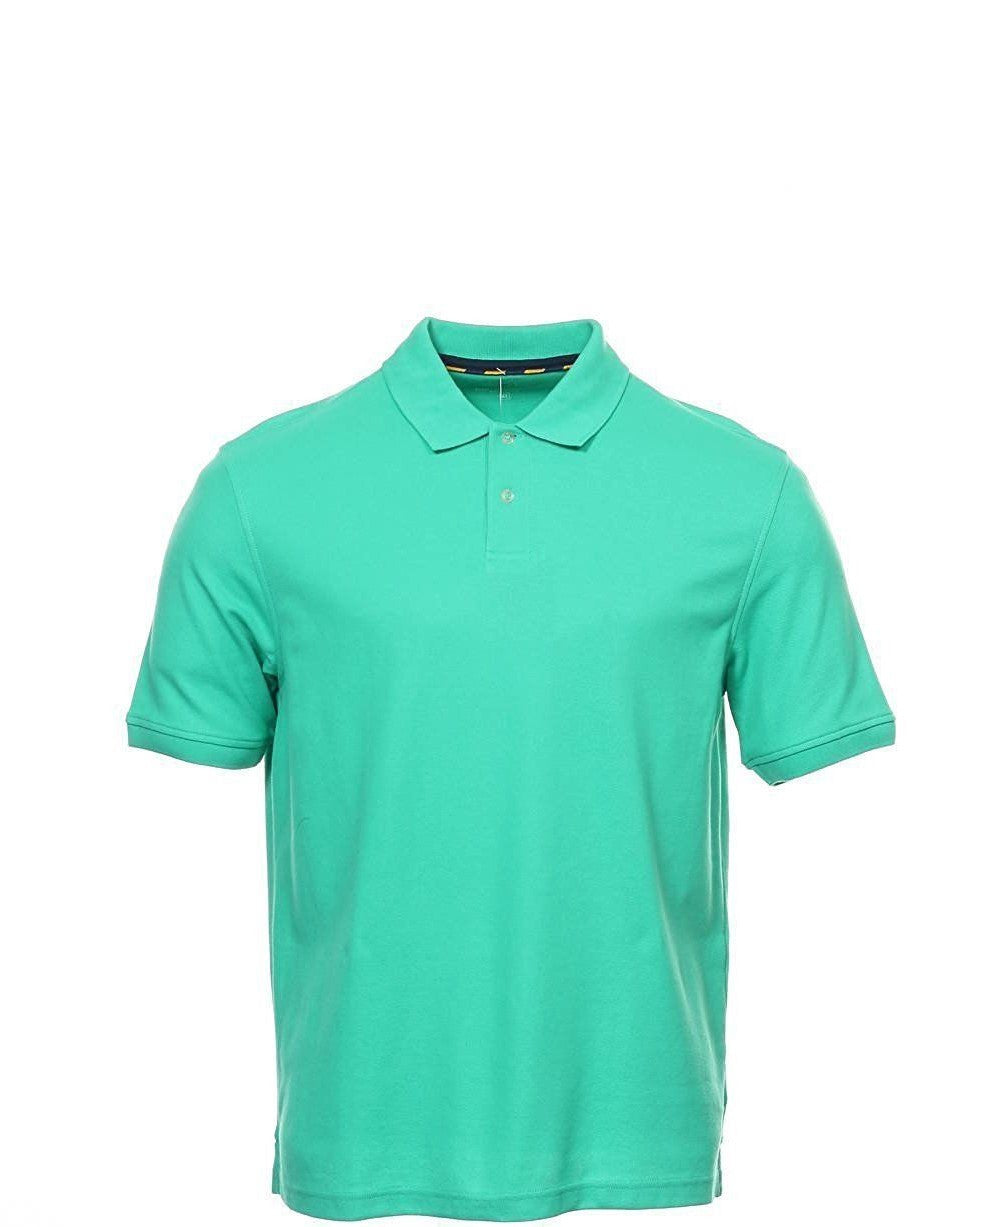 Club Room Short Sleeve Solid Estate Performance Polo Menthol Mint Size M